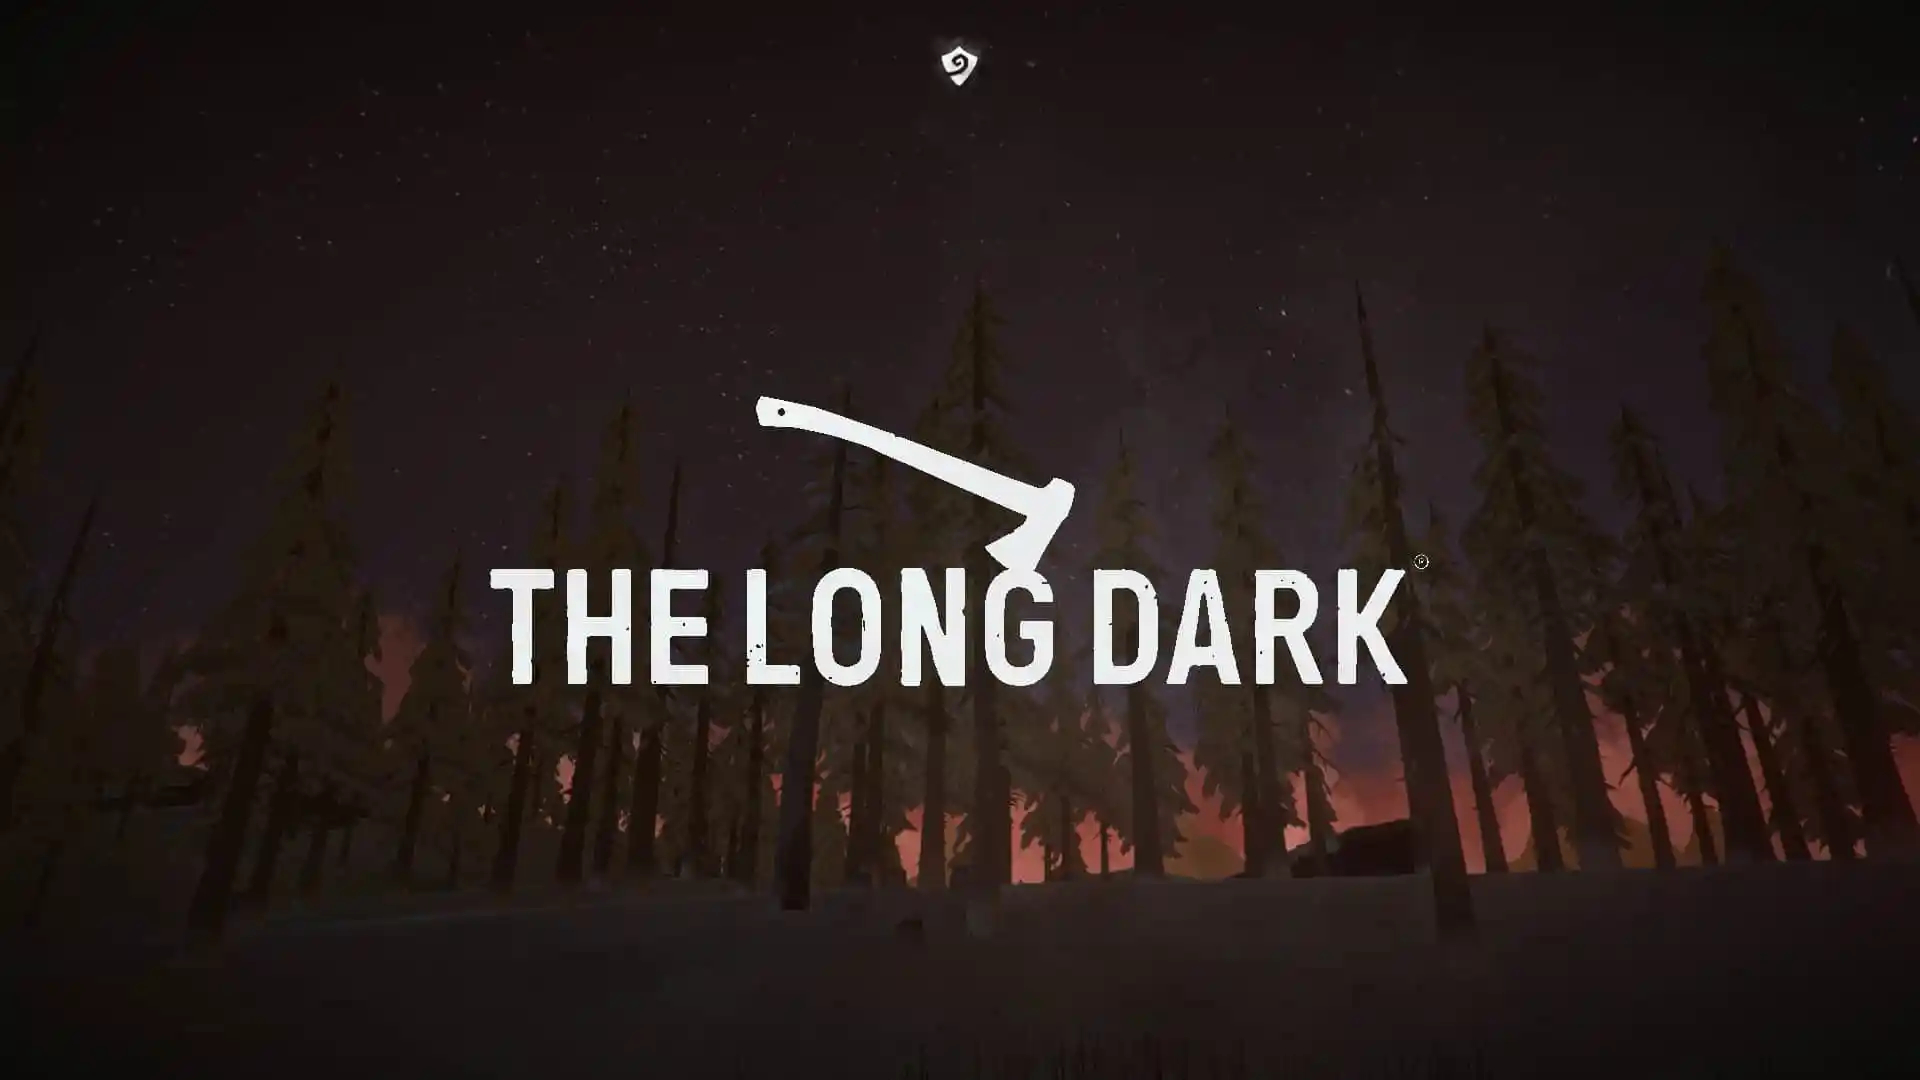 1920x1080 Gaming: The Long Dark | There and back agai